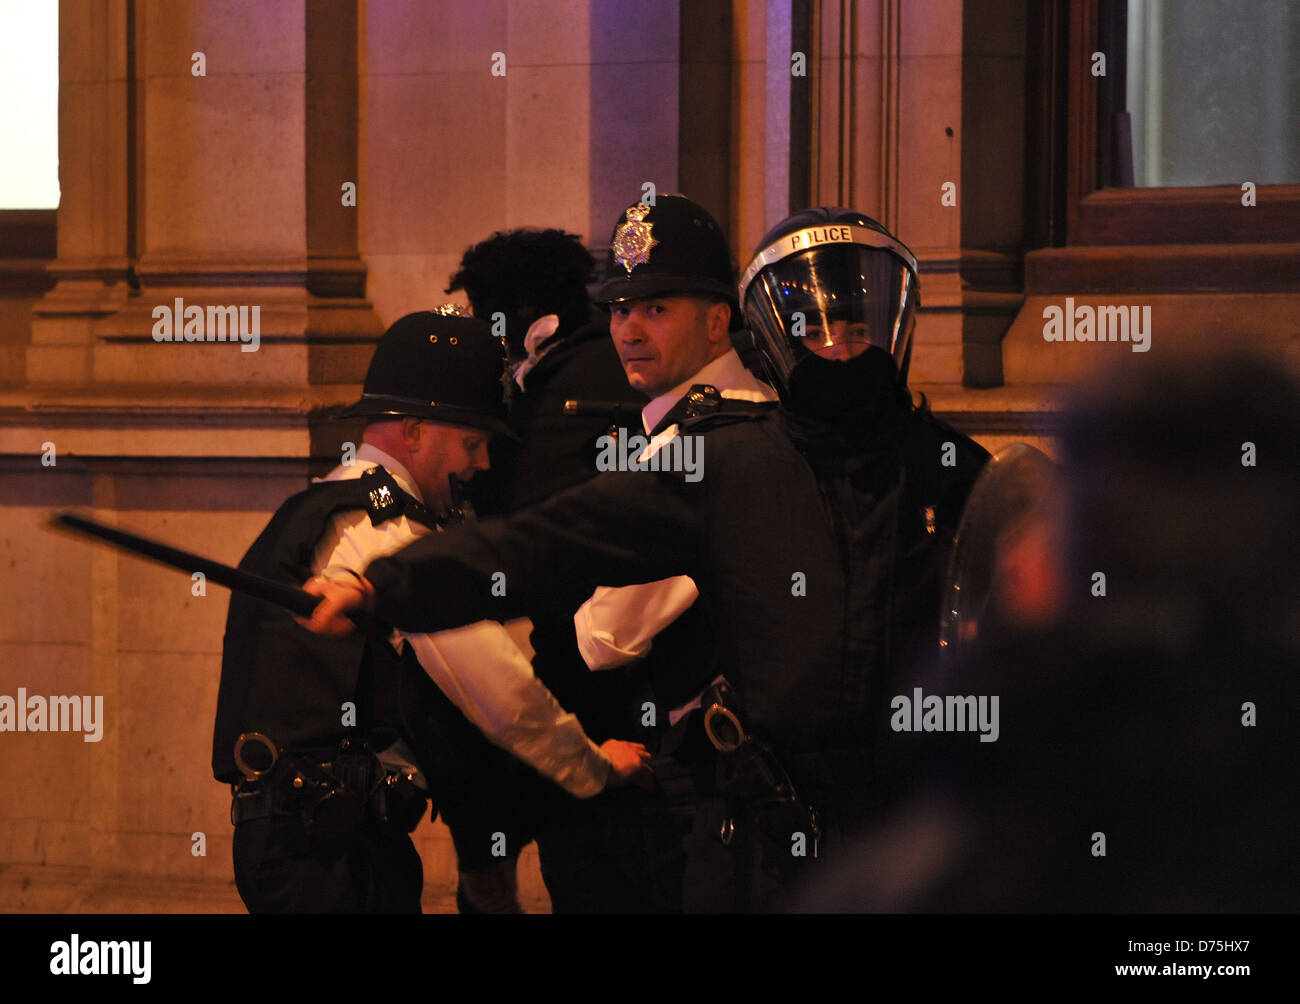 Police officers detain a man as rioters attack shops and property during an unrest in North London's Camden Town on August 9, Stock Photo